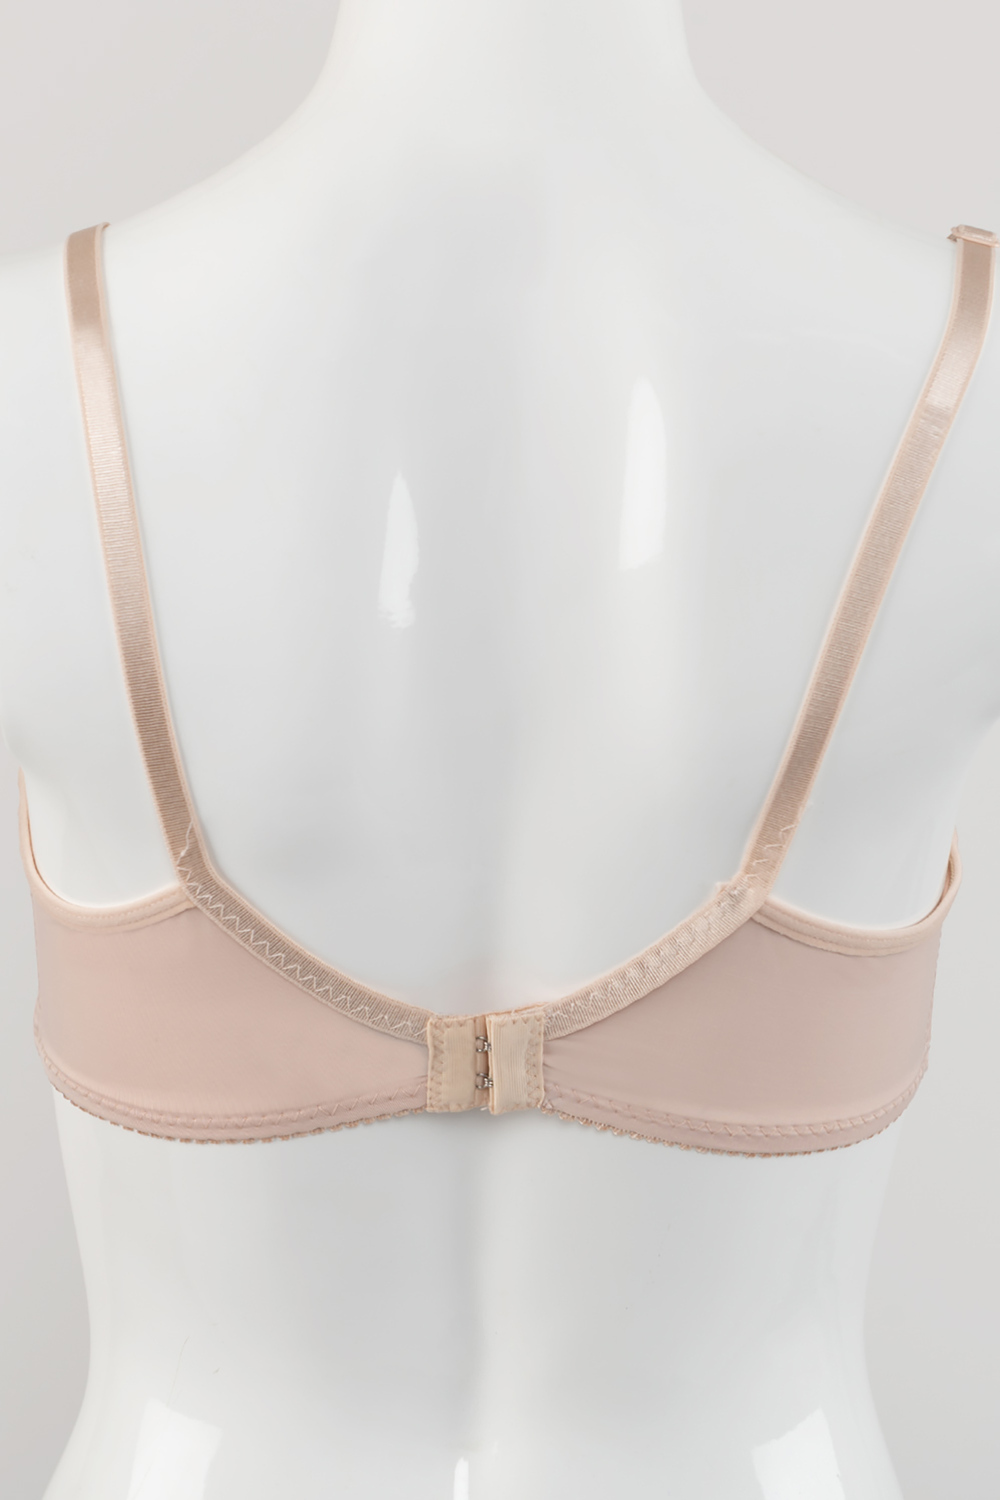 Full support underwire bra with net detail - Nude. Colour: beige. Size: 36c